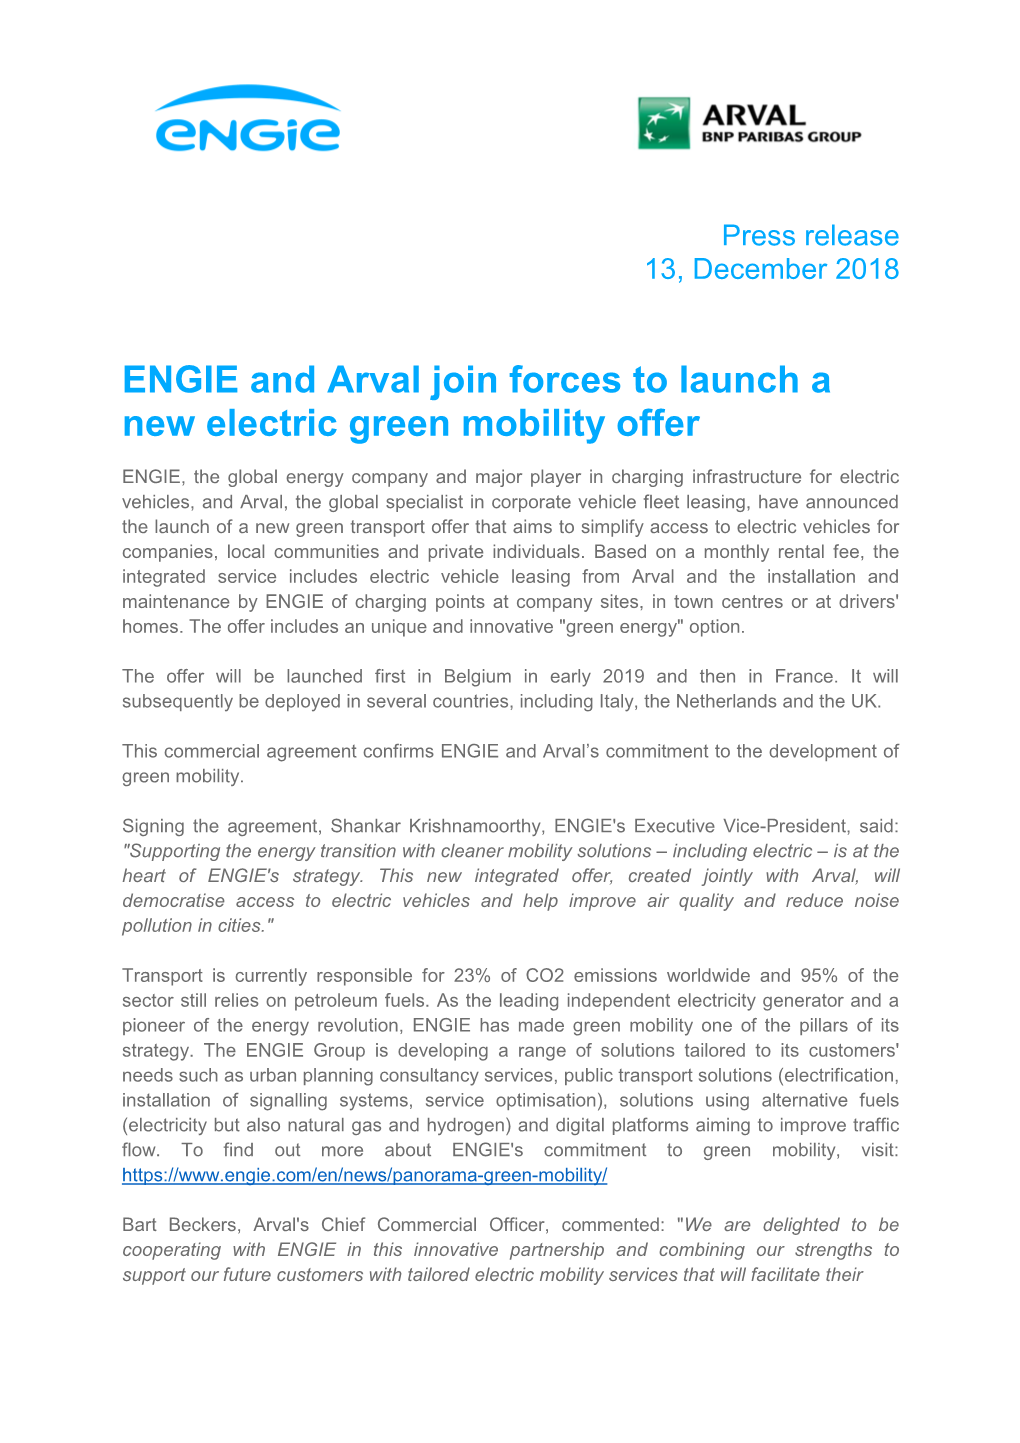 ENGIE and Arval Join Forces to Launch a New Electric Green Mobility Offer